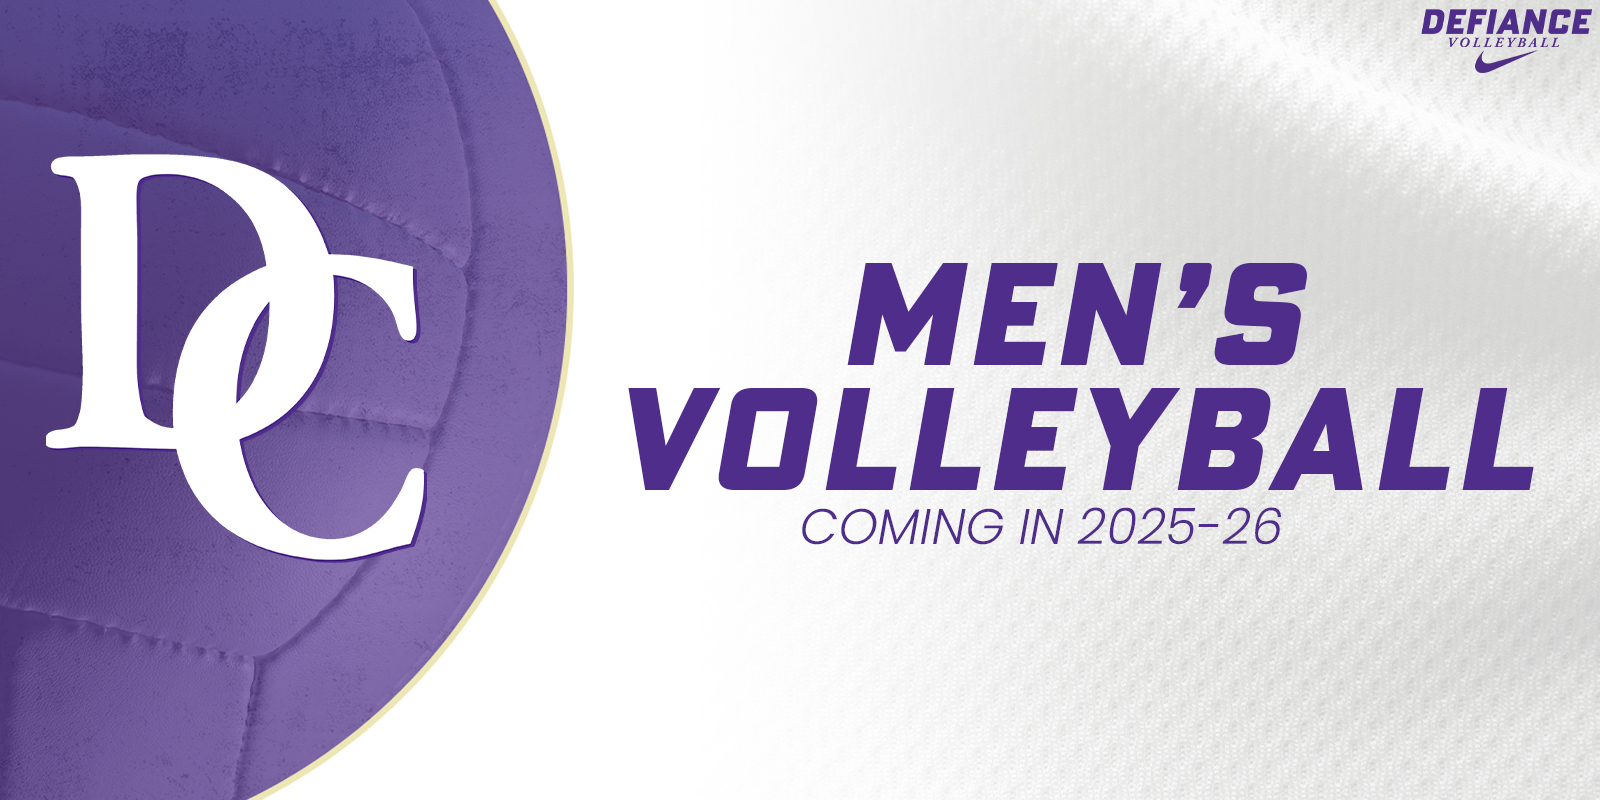 Men’s Volleyball coming to Defiance College beginning in 2025-26